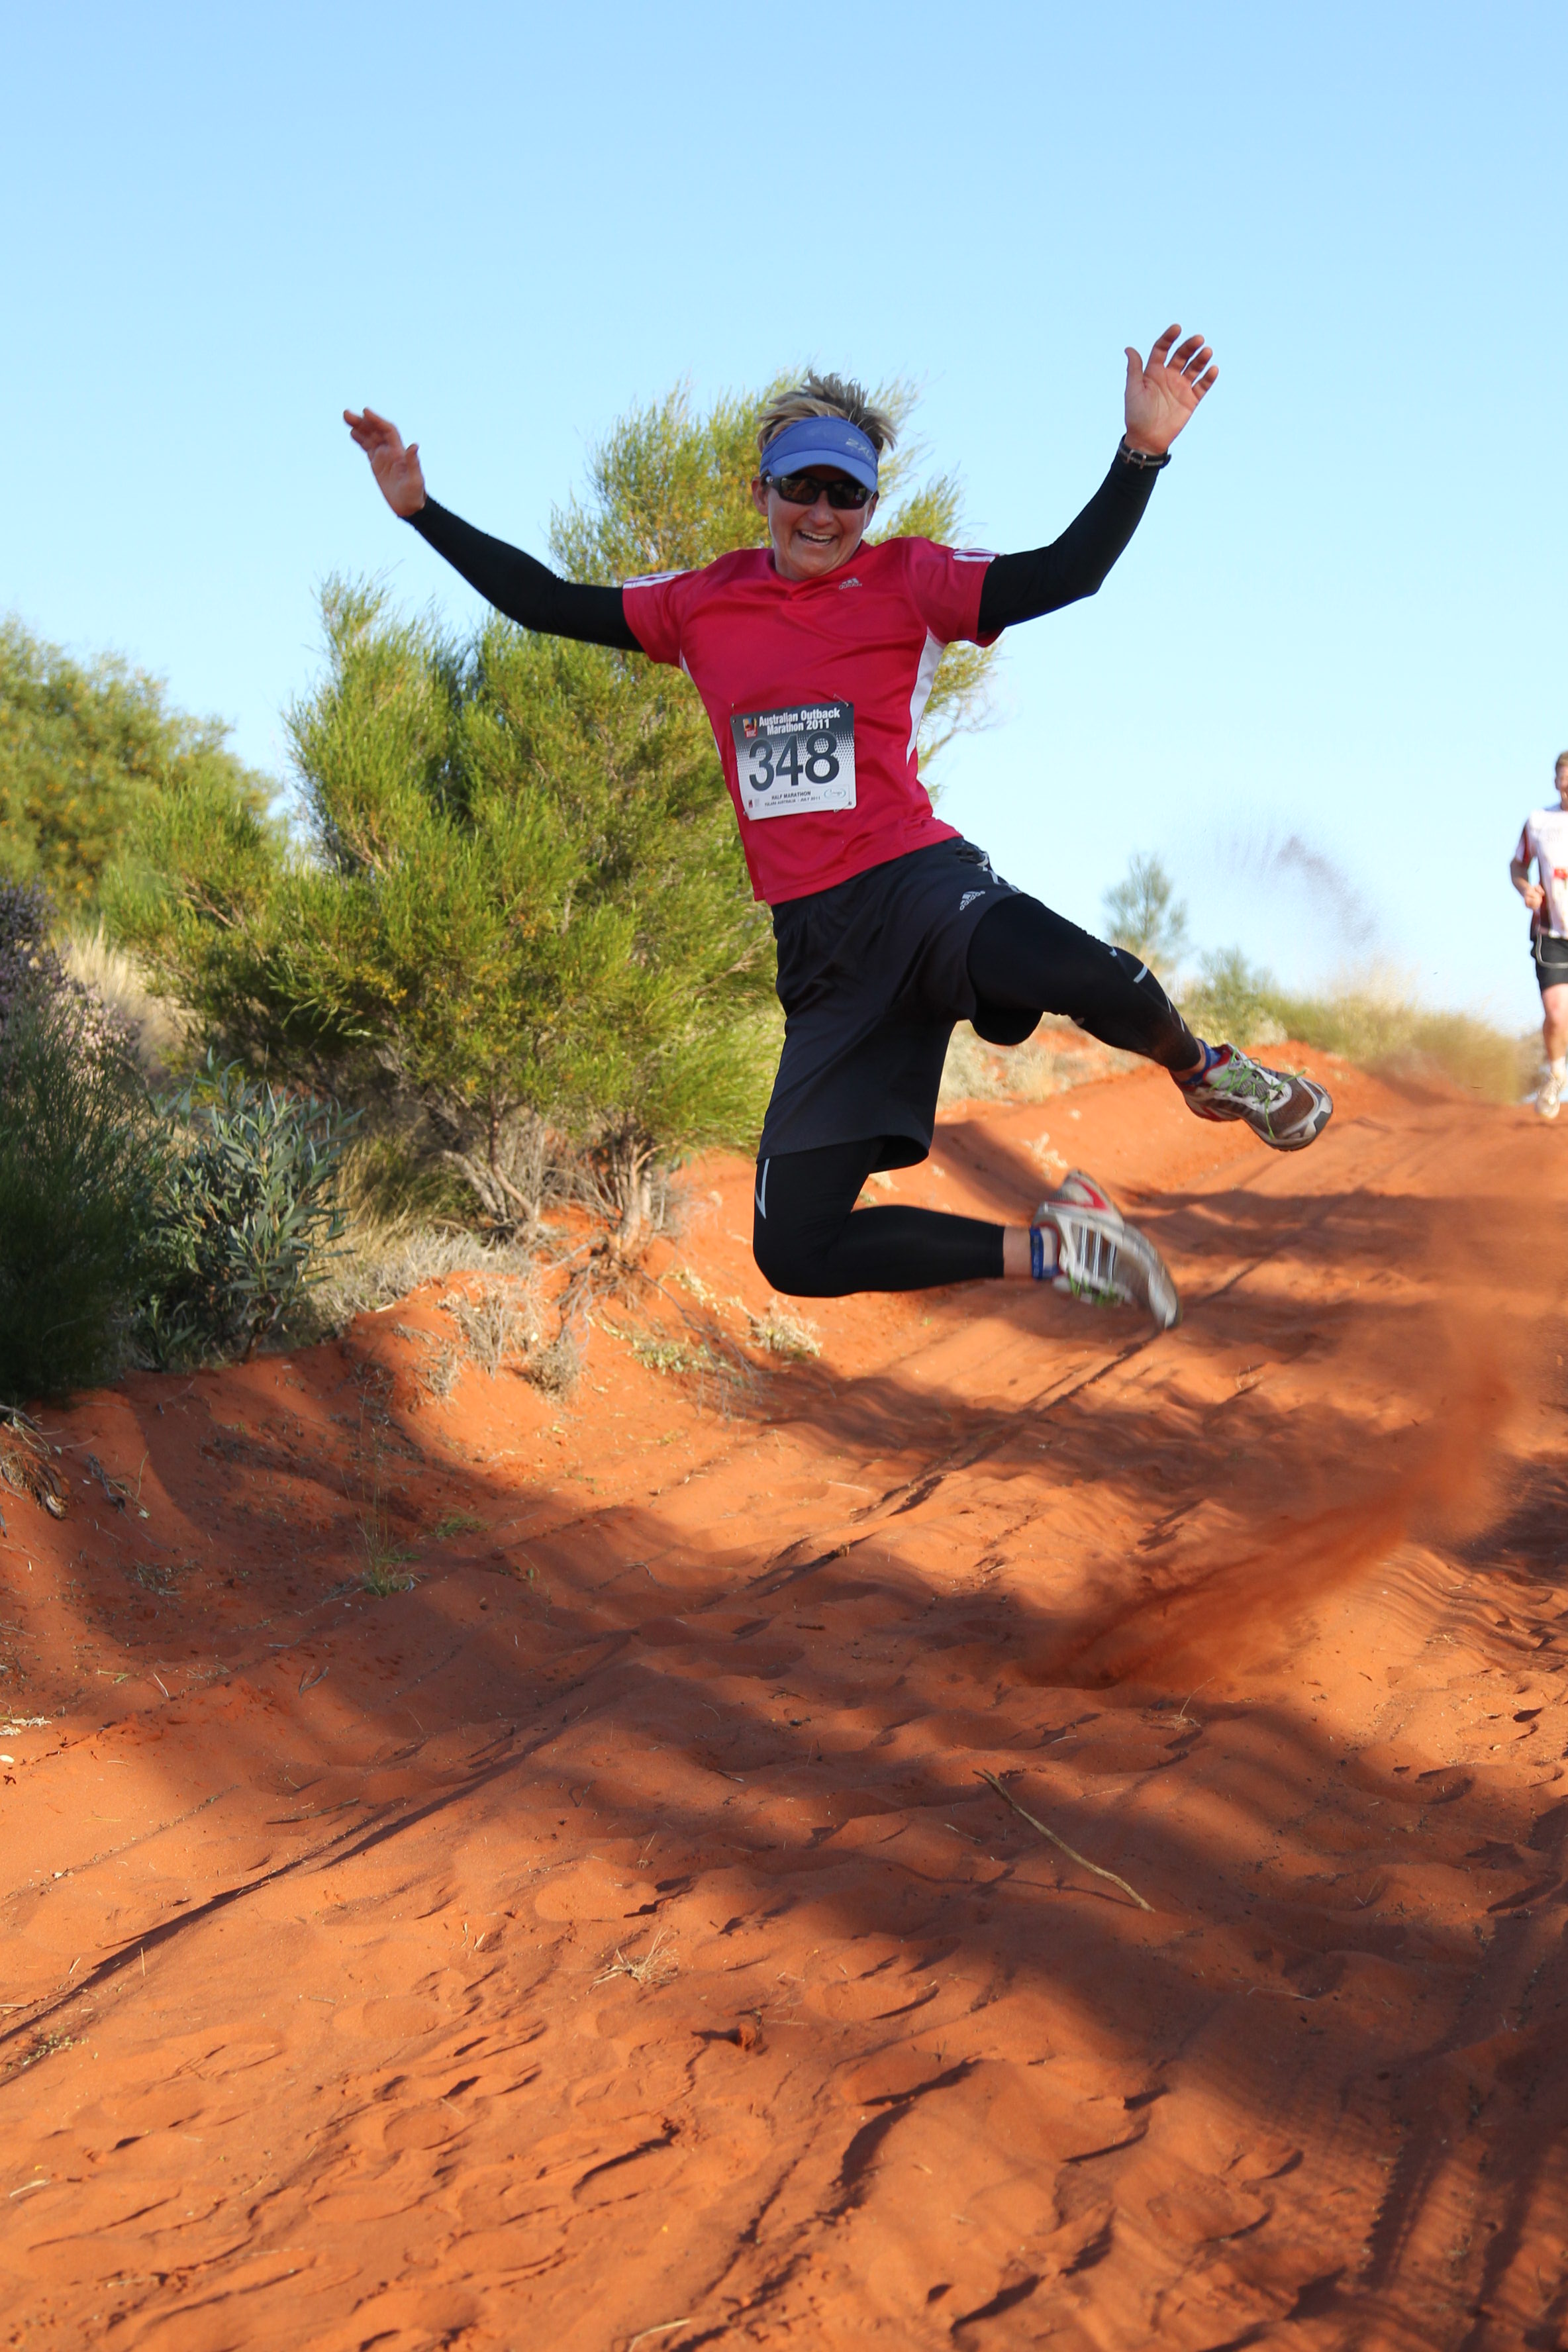 A woman jumps while running the Australia Outback Marathon